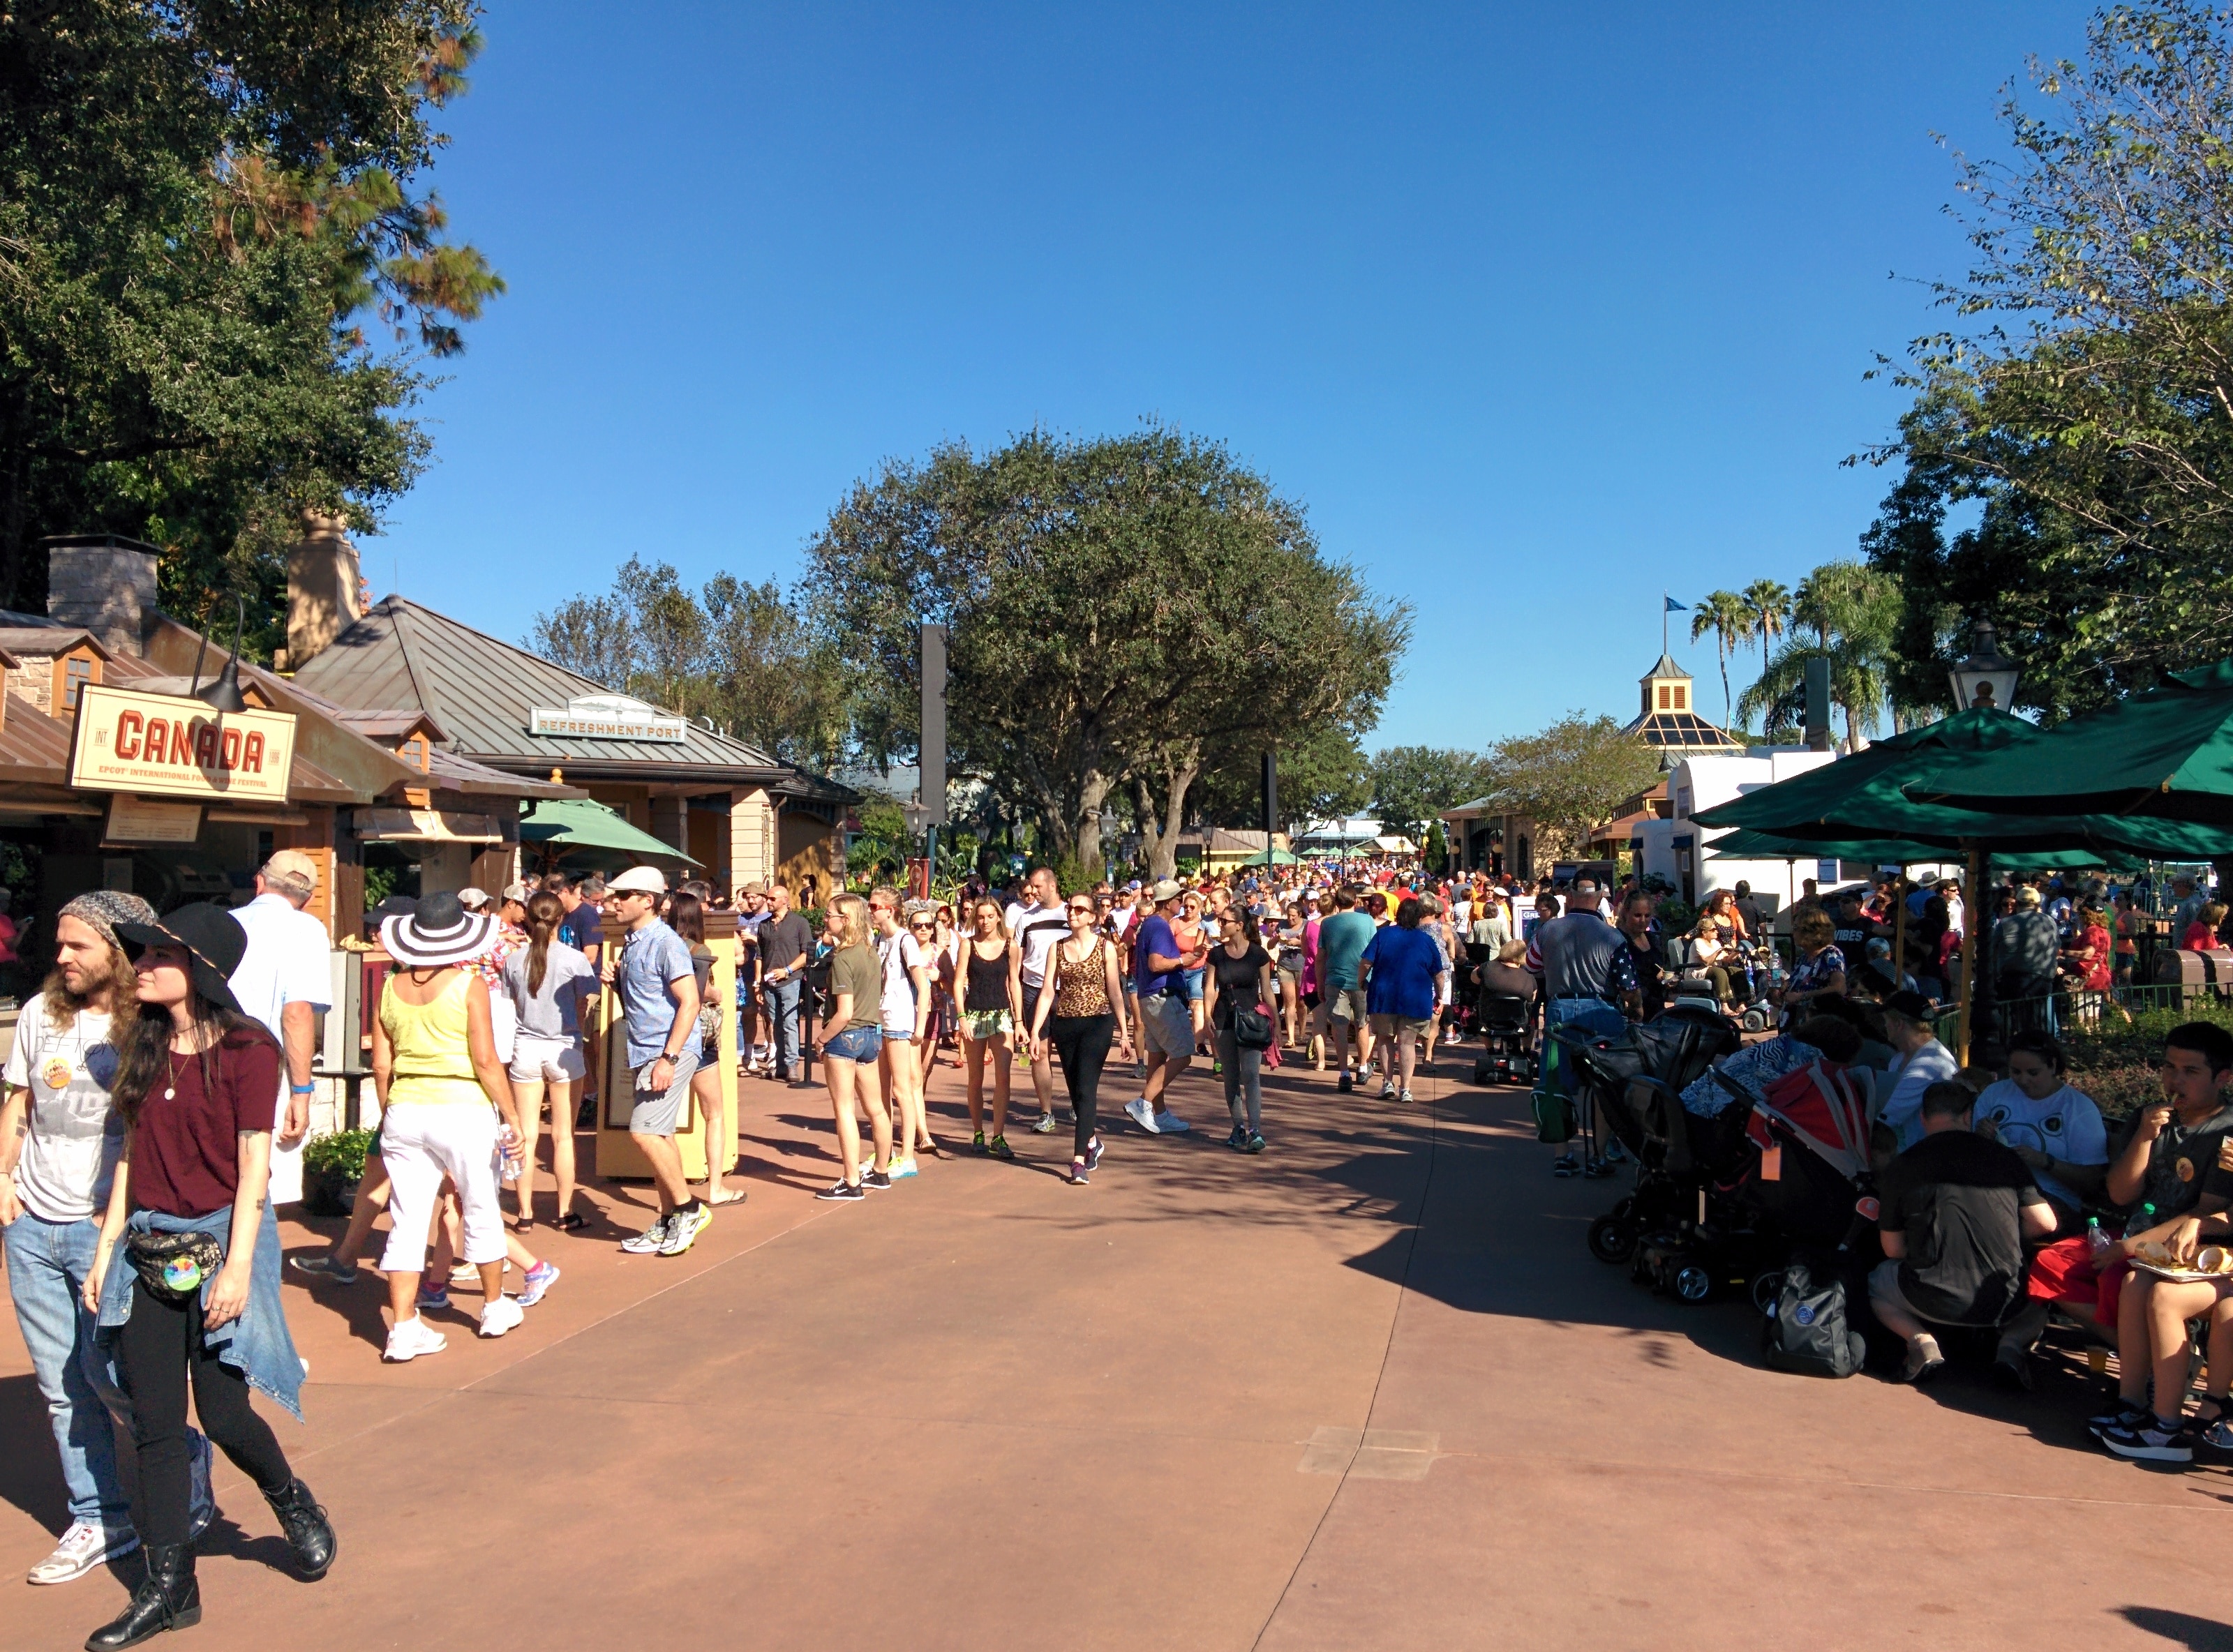 High crowds at Epcot during the food & wine festival